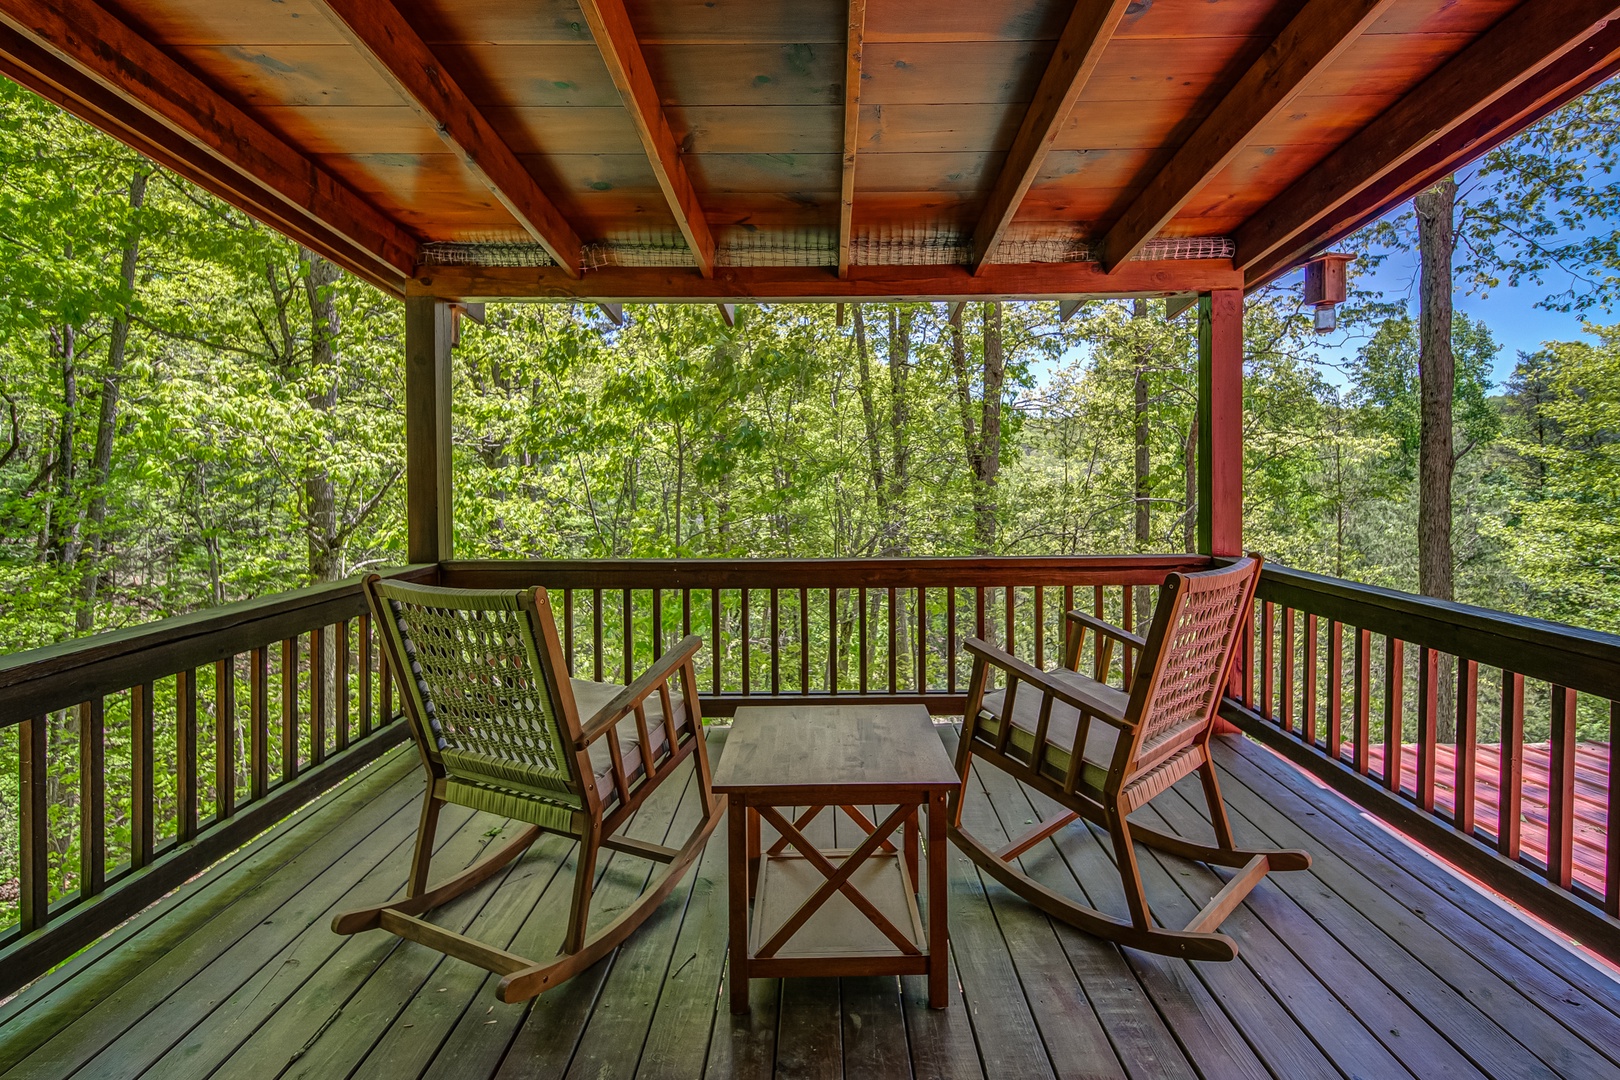 Bask in the views on your private Master Suite deck and sip your coffee while taking in the Aska Mountain air before heading out on your next adventure